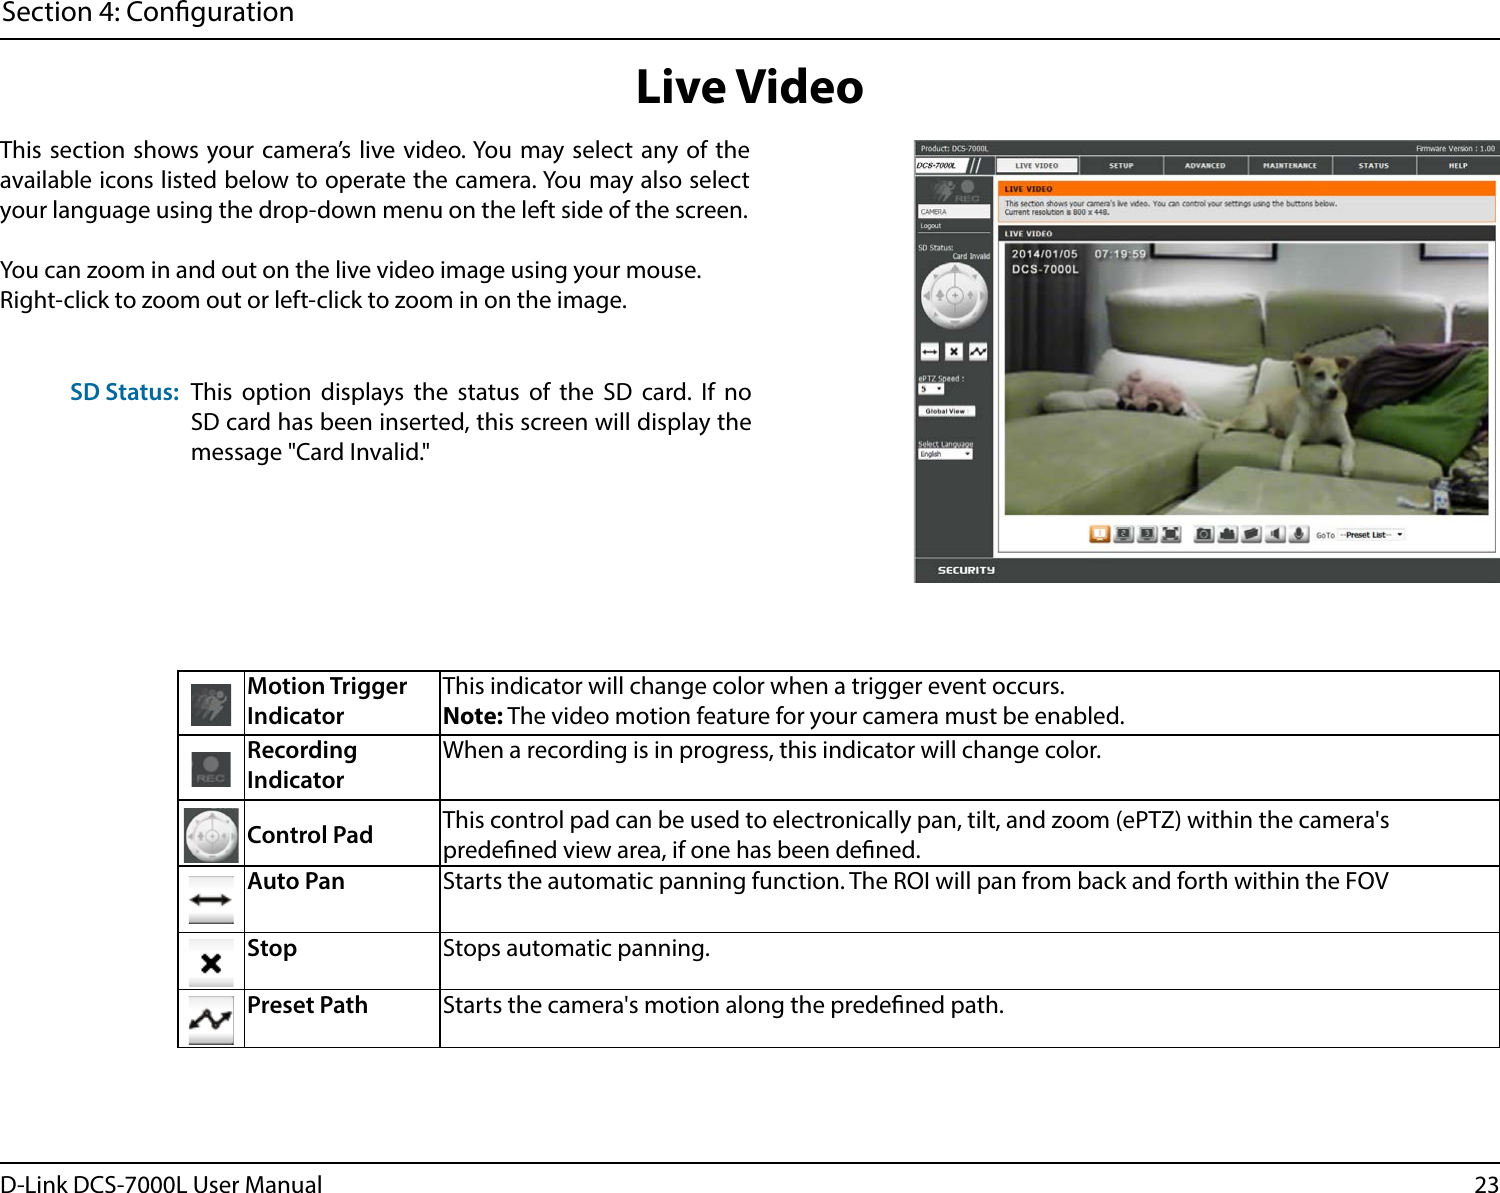 23D-Link DCS-7000L User ManualSection 4: CongurationLive VideoThis section shows your camera’s live video. You may select any of the available icons listed below to operate the camera. You may also select your language using the drop-down menu on the left side of the screen.You can zoom in and out on the live video image using your mouse. Right-click to zoom out or left-click to zoom in on the image.Motion Trigger IndicatorThis indicator will change color when a trigger event occurs.Note: The video motion feature for your camera must be enabled.Recording IndicatorWhen a recording is in progress, this indicator will change color.Control Pad This control pad can be used to electronically pan, tilt, and zoom (ePTZ) within the camera&apos;s predened view area, if one has been dened.Auto Pan Starts the automatic panning function. The ROI will pan from back and forth within the FOVStop Stops automatic panning.Preset Path Starts the camera&apos;s motion along the predened path.This option displays the status of the SD card. If no SD card has been inserted, this screen will display the message &quot;Card Invalid.&quot;SD Status: